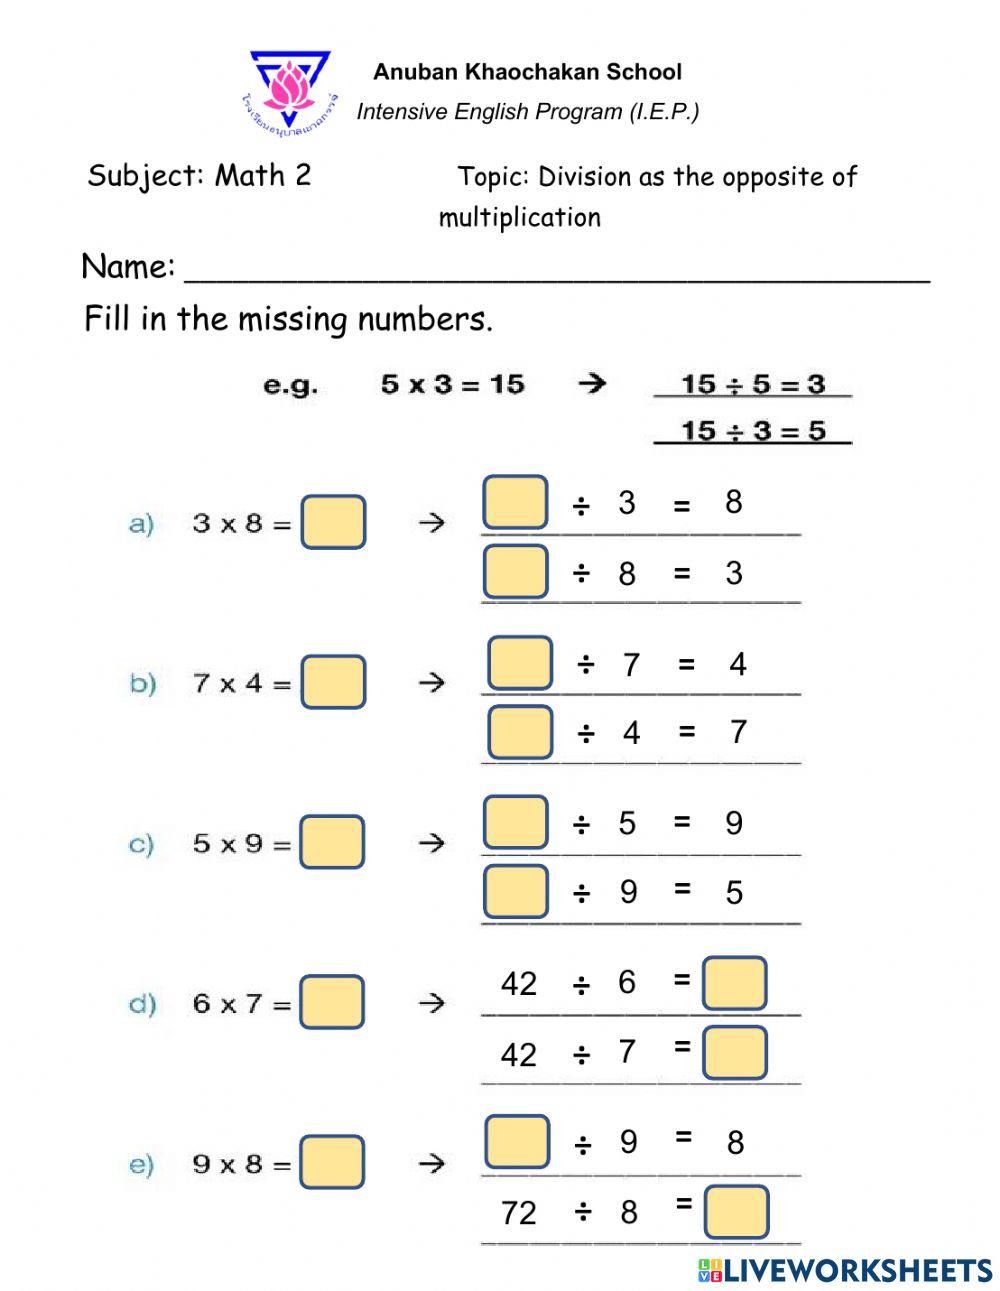 Division as the opposite of multiplication